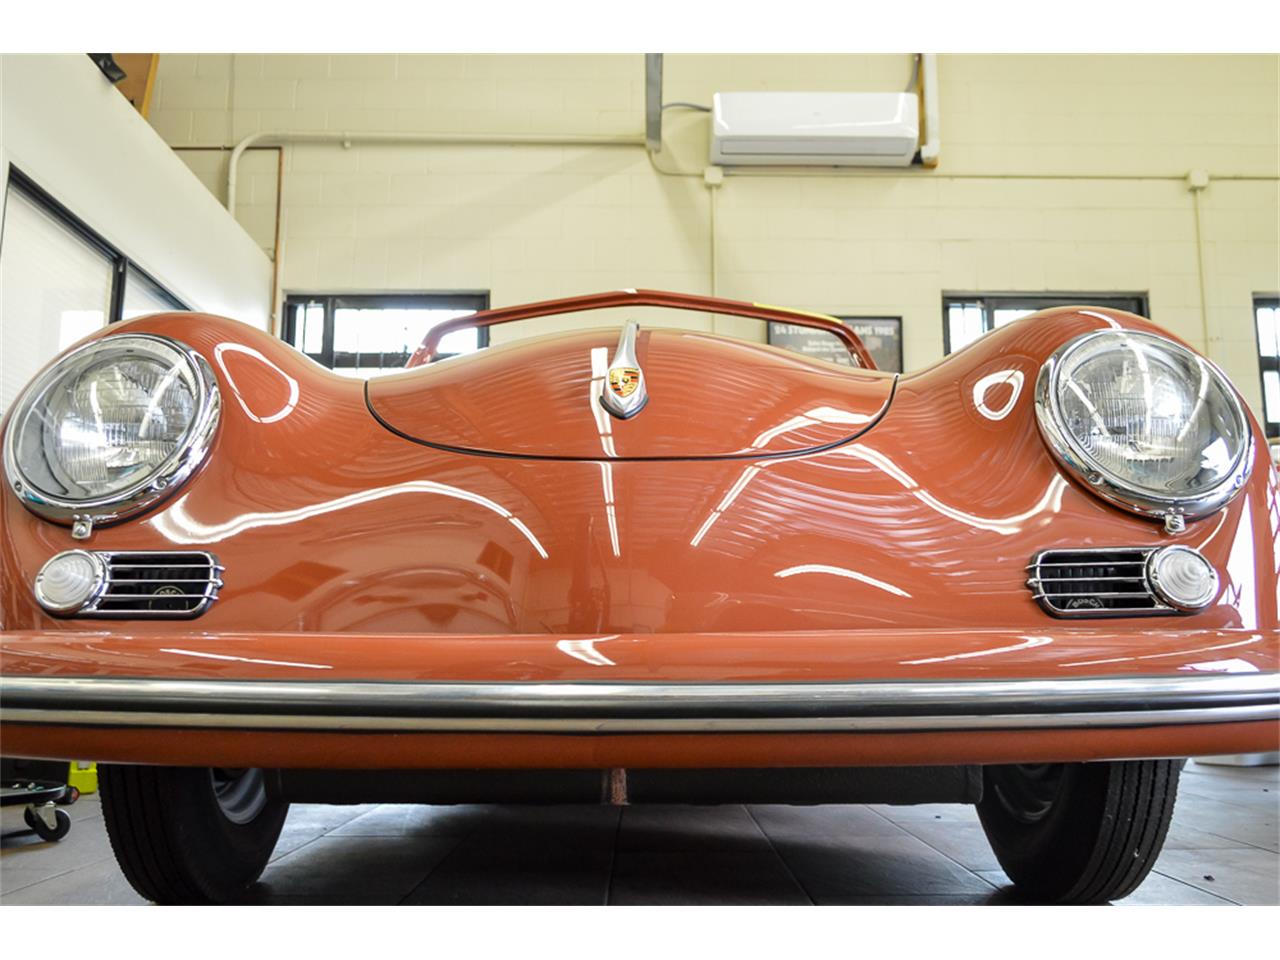 1955 Porsche 356 Continental Cabriolet for sale in Fallbrook, CA – photo 22